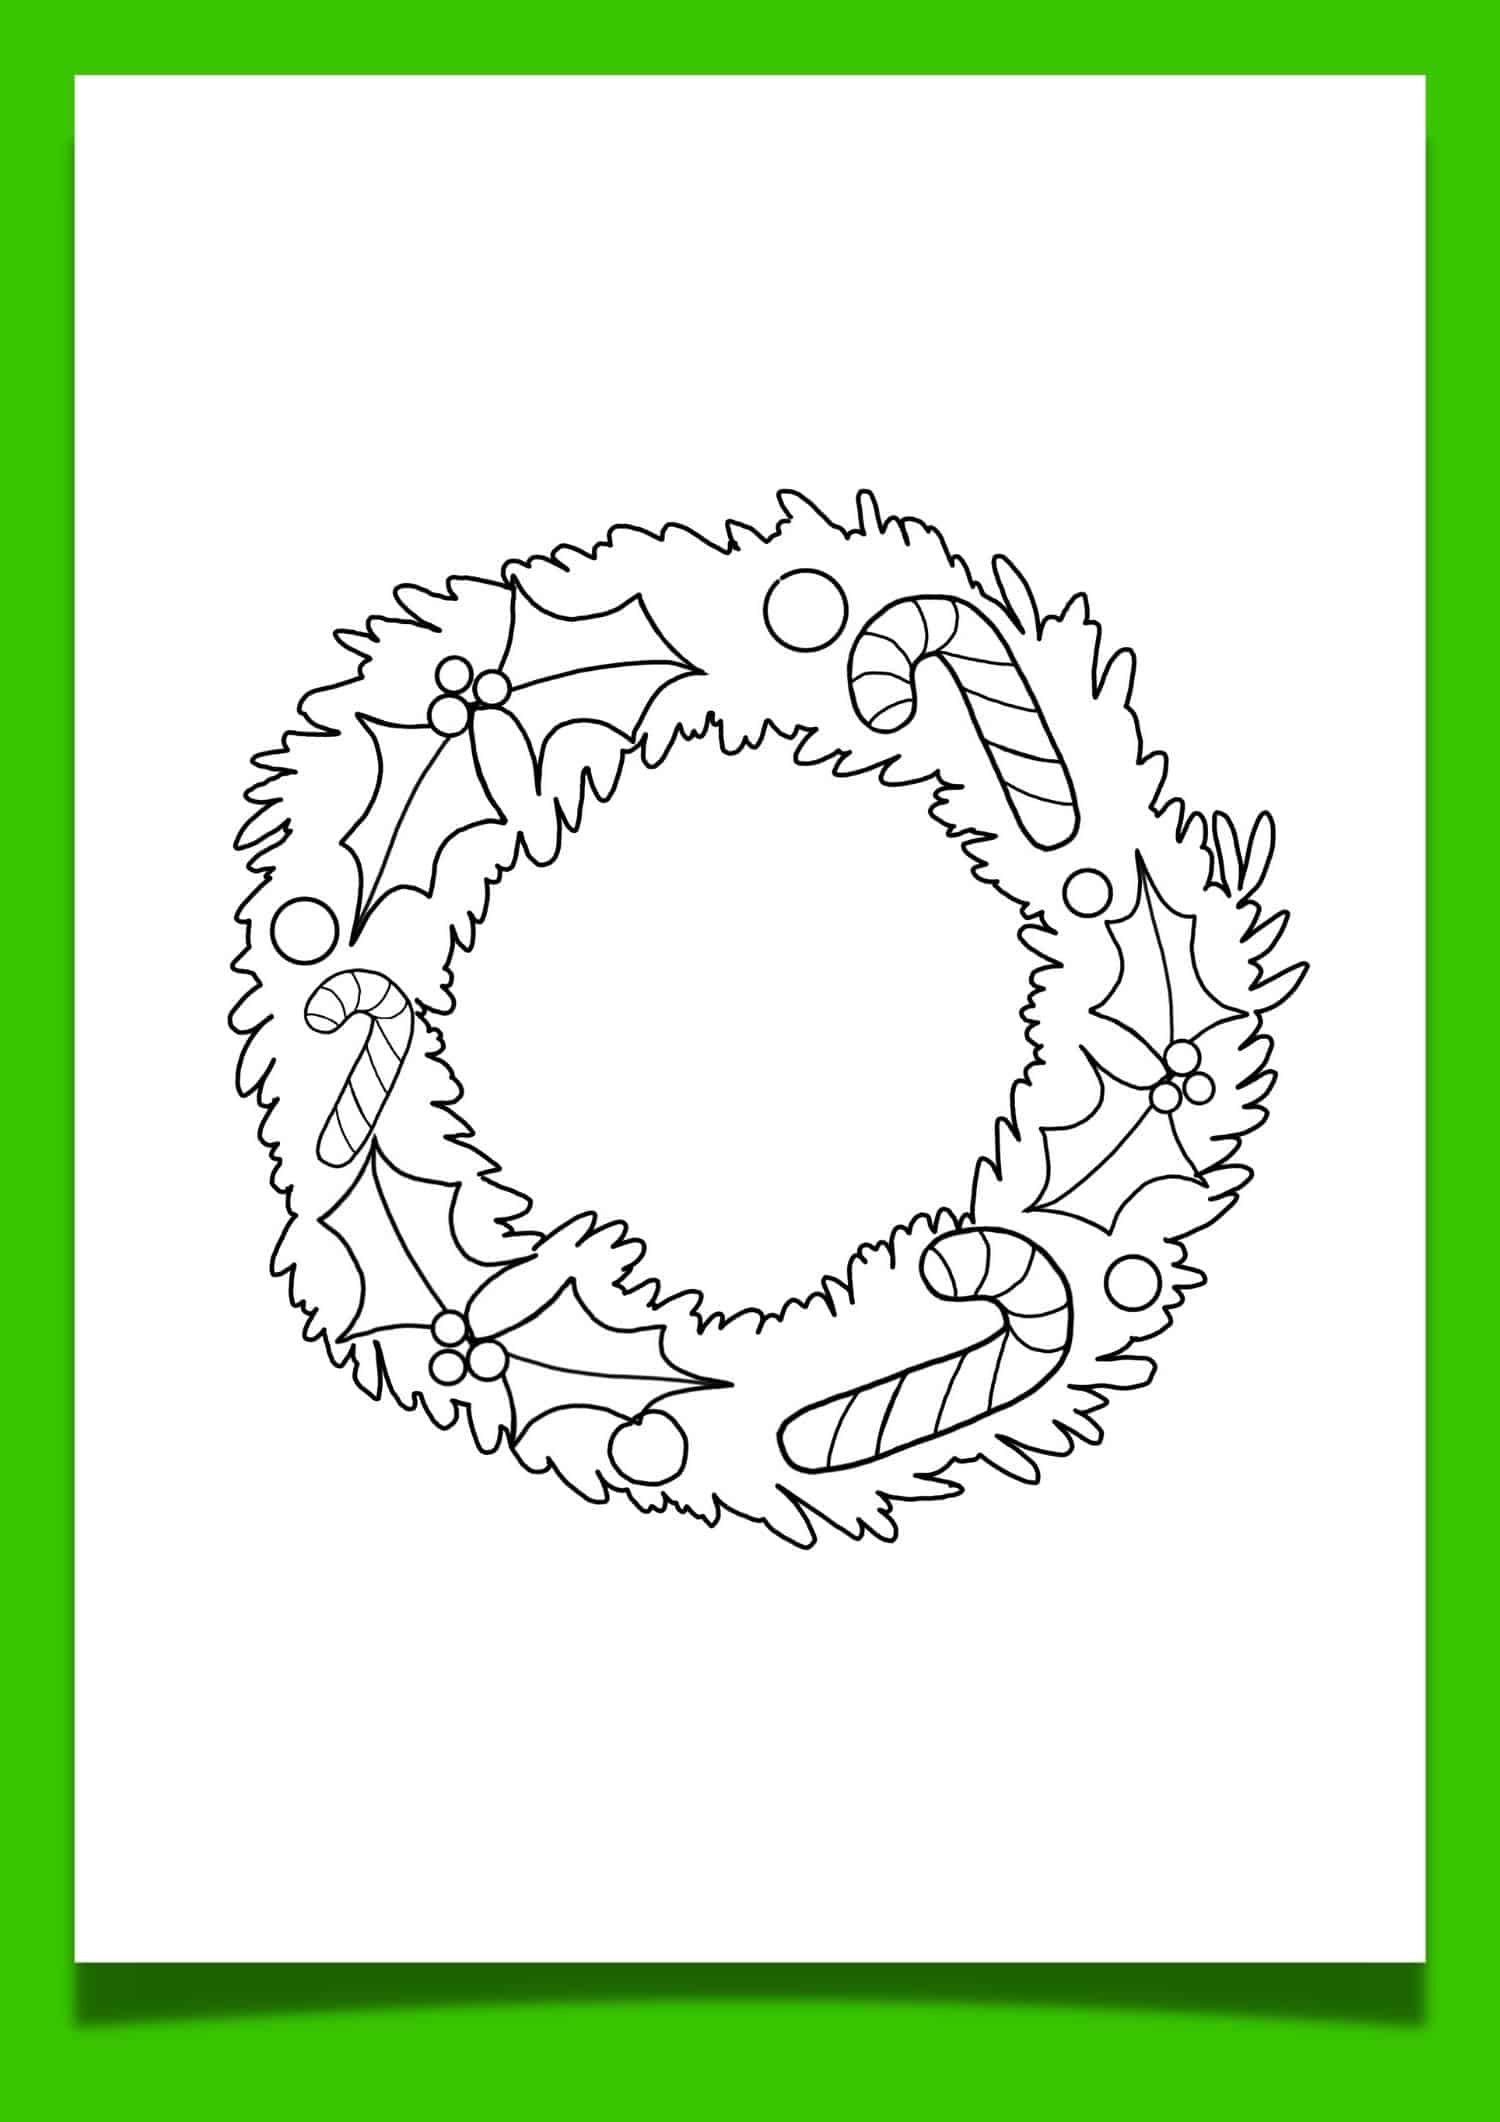 Christmas Wreath Template 6 FREE Printables to Get You Feeling Festive